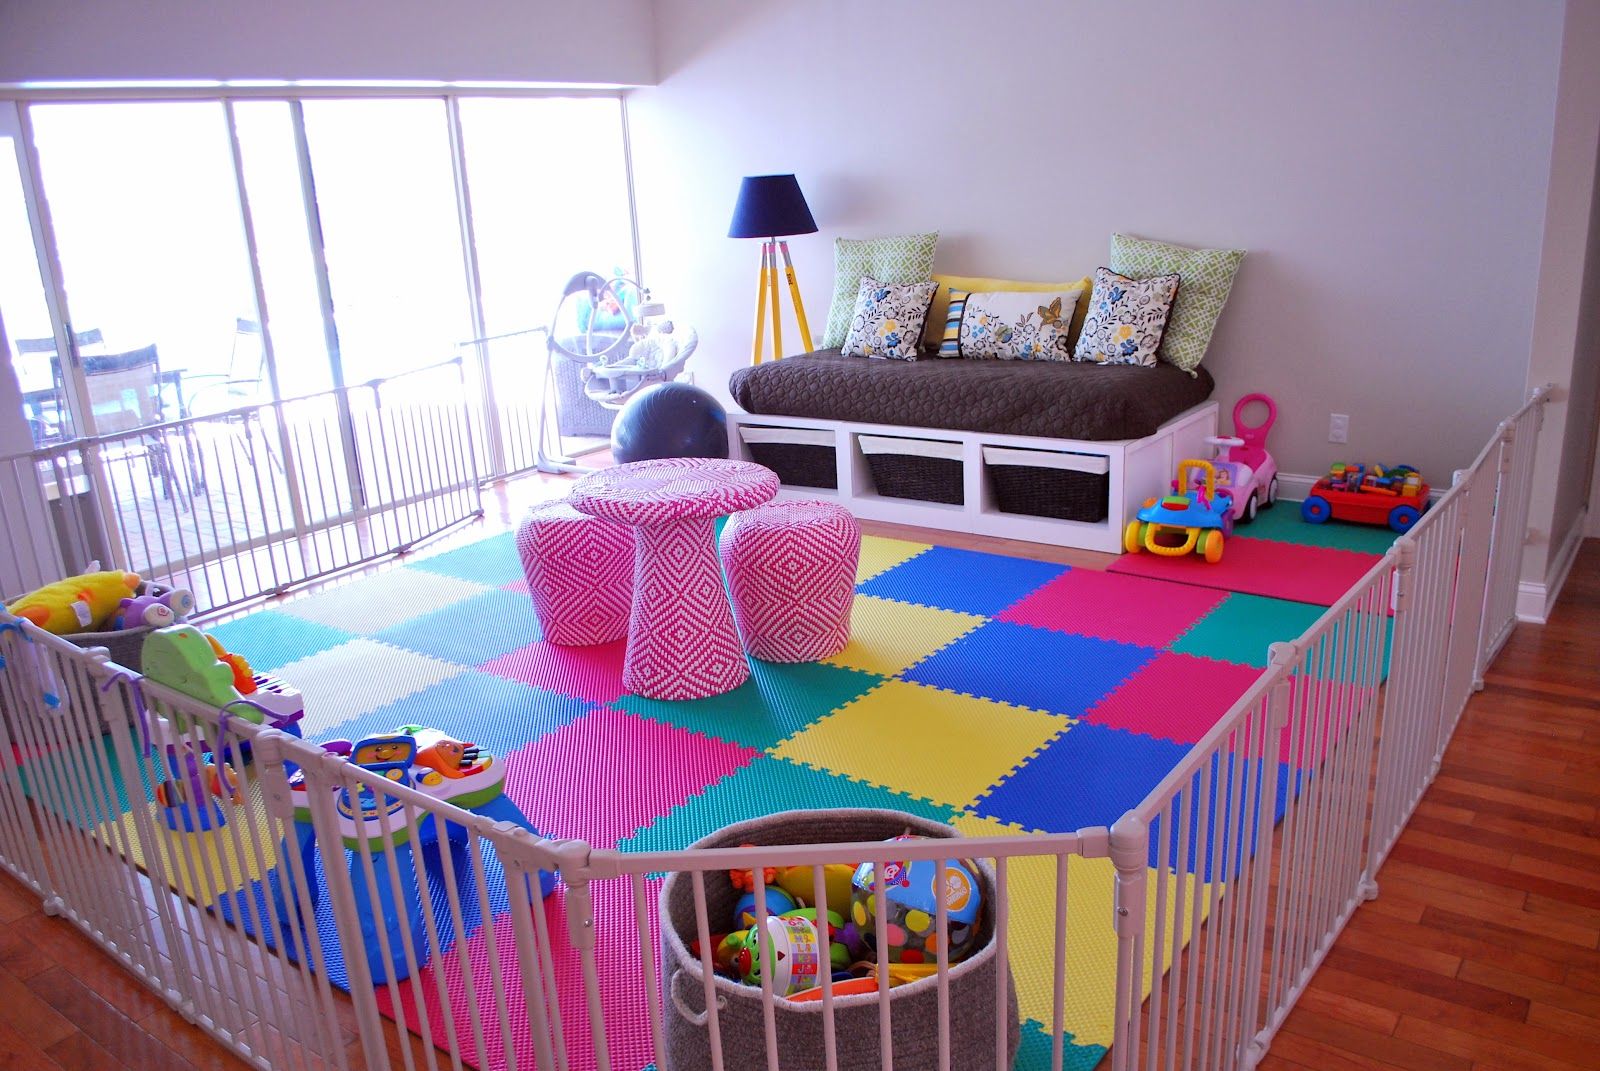 How to Make a Kid's Playroom on a Budget